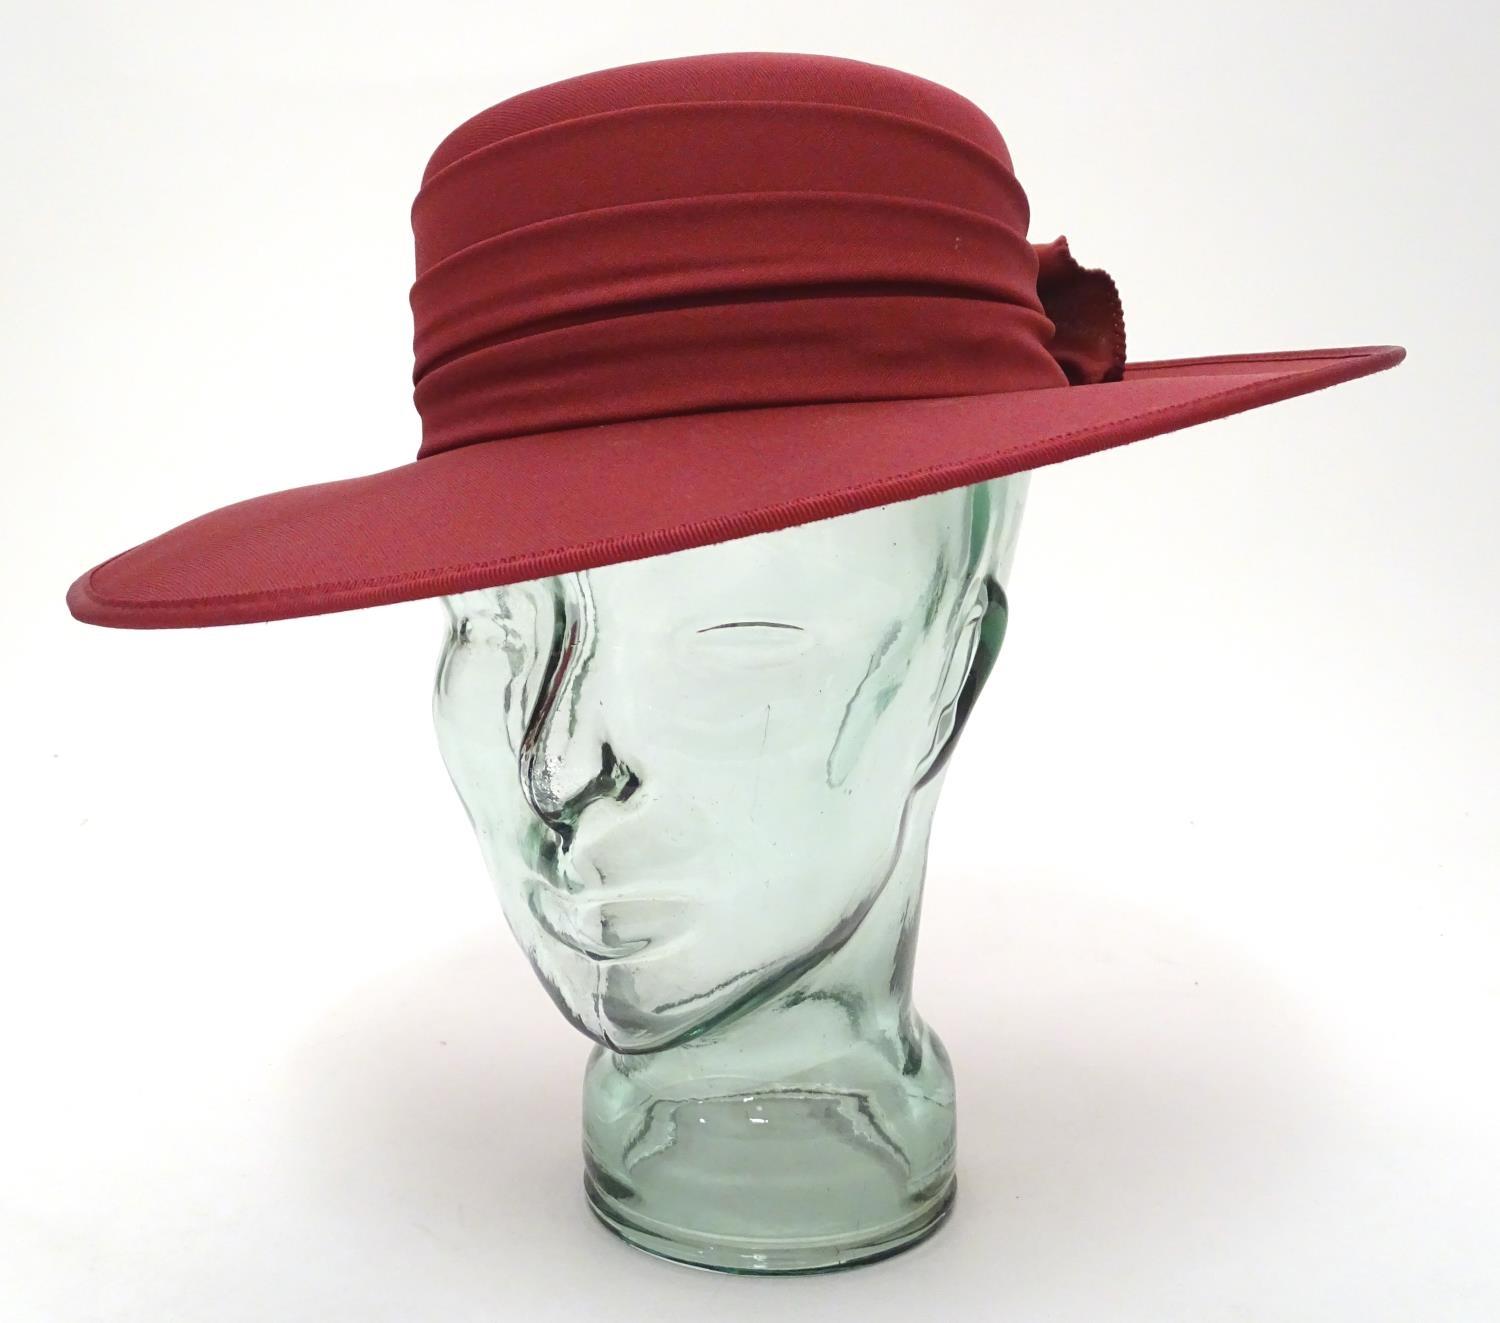 A ladies red hat by Kangol Please Note - we do not make reference to the condition of lots within